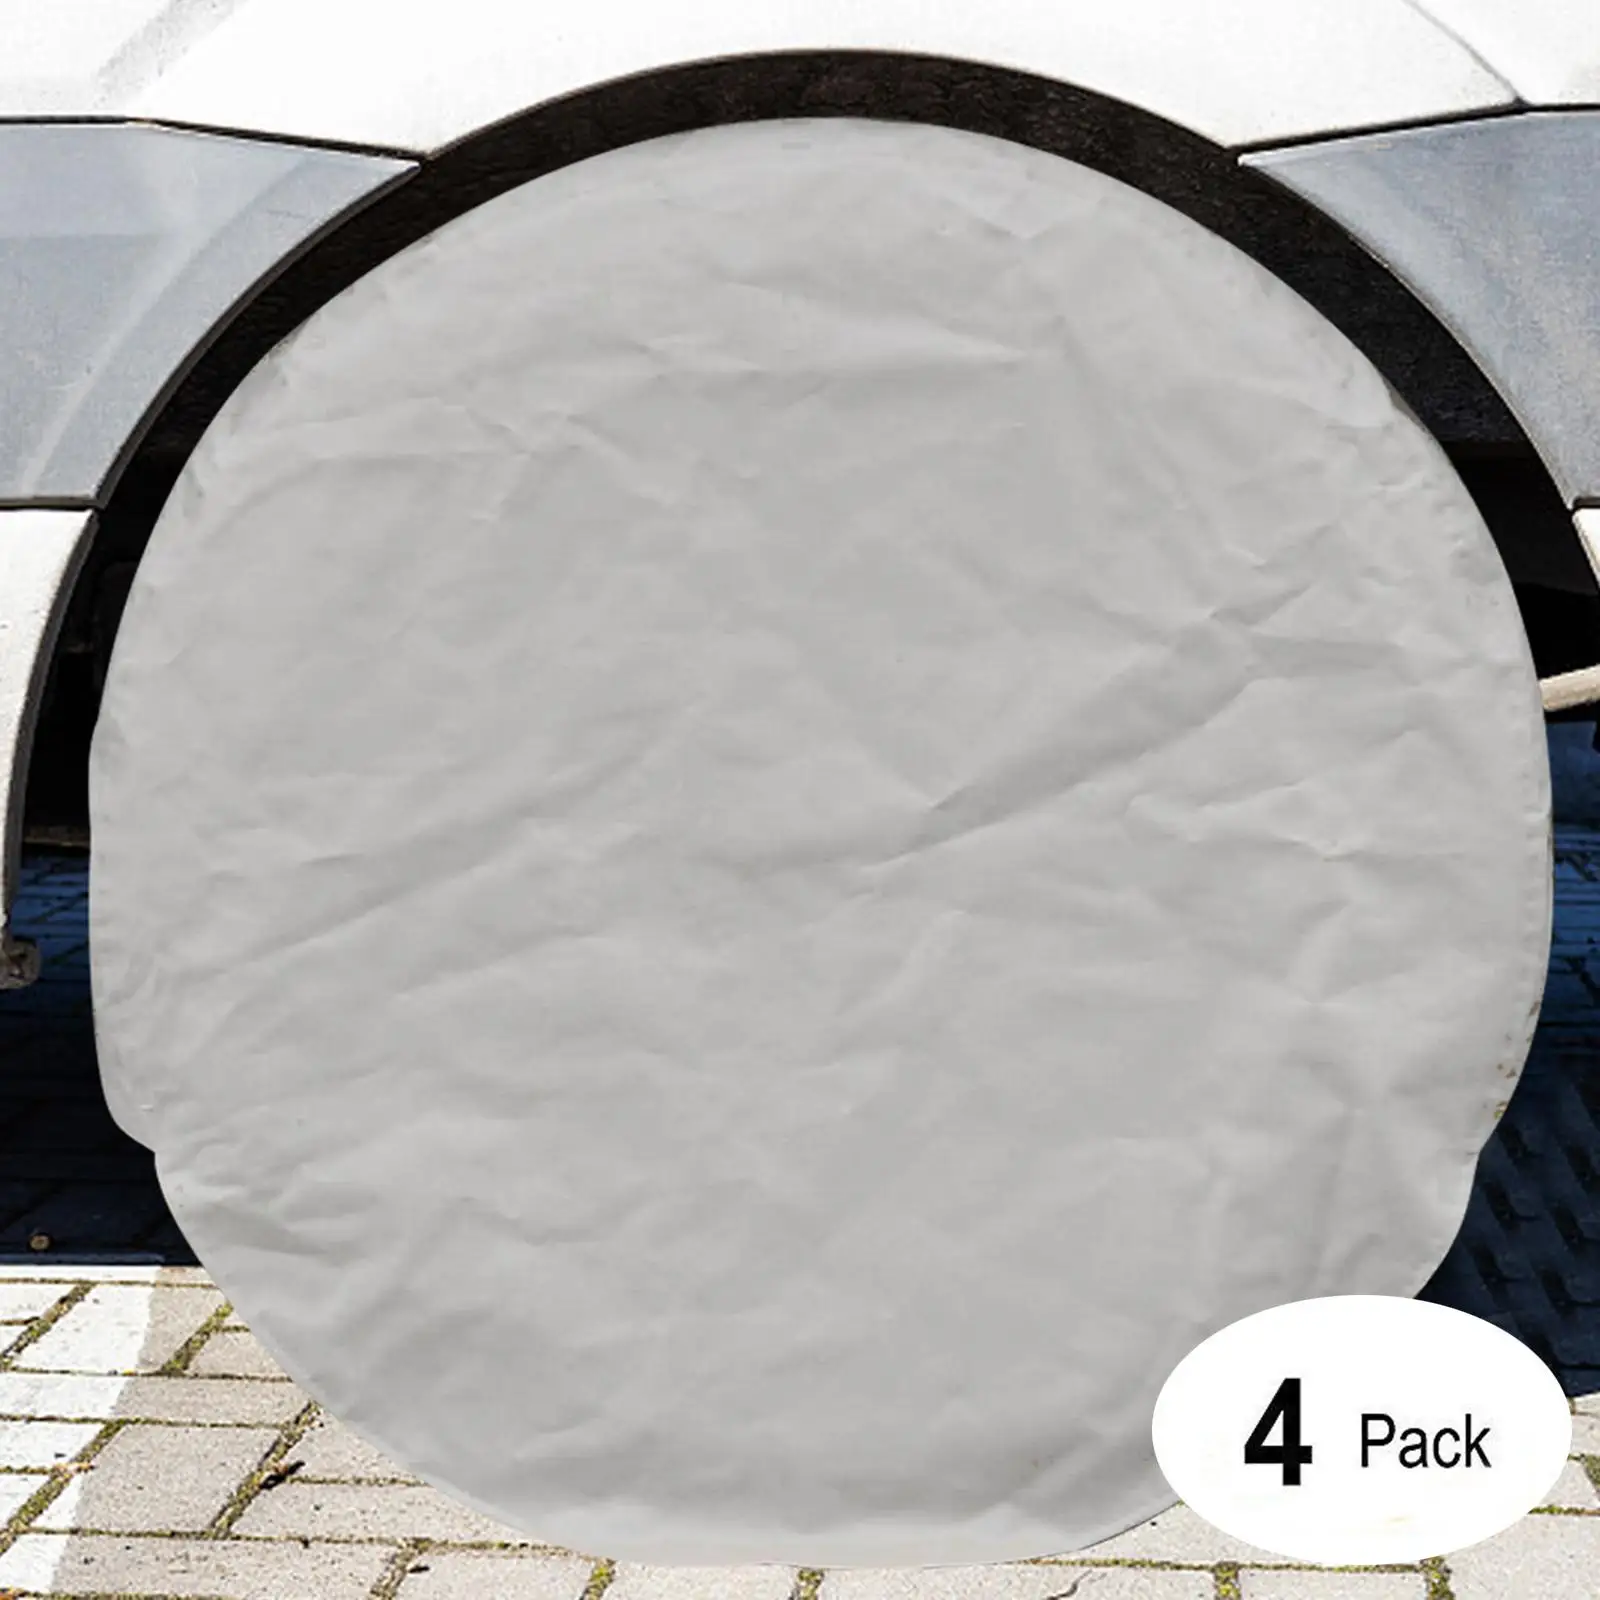 Tire Cover for Diameter 27-29 Inches/ Replacement Waterproof